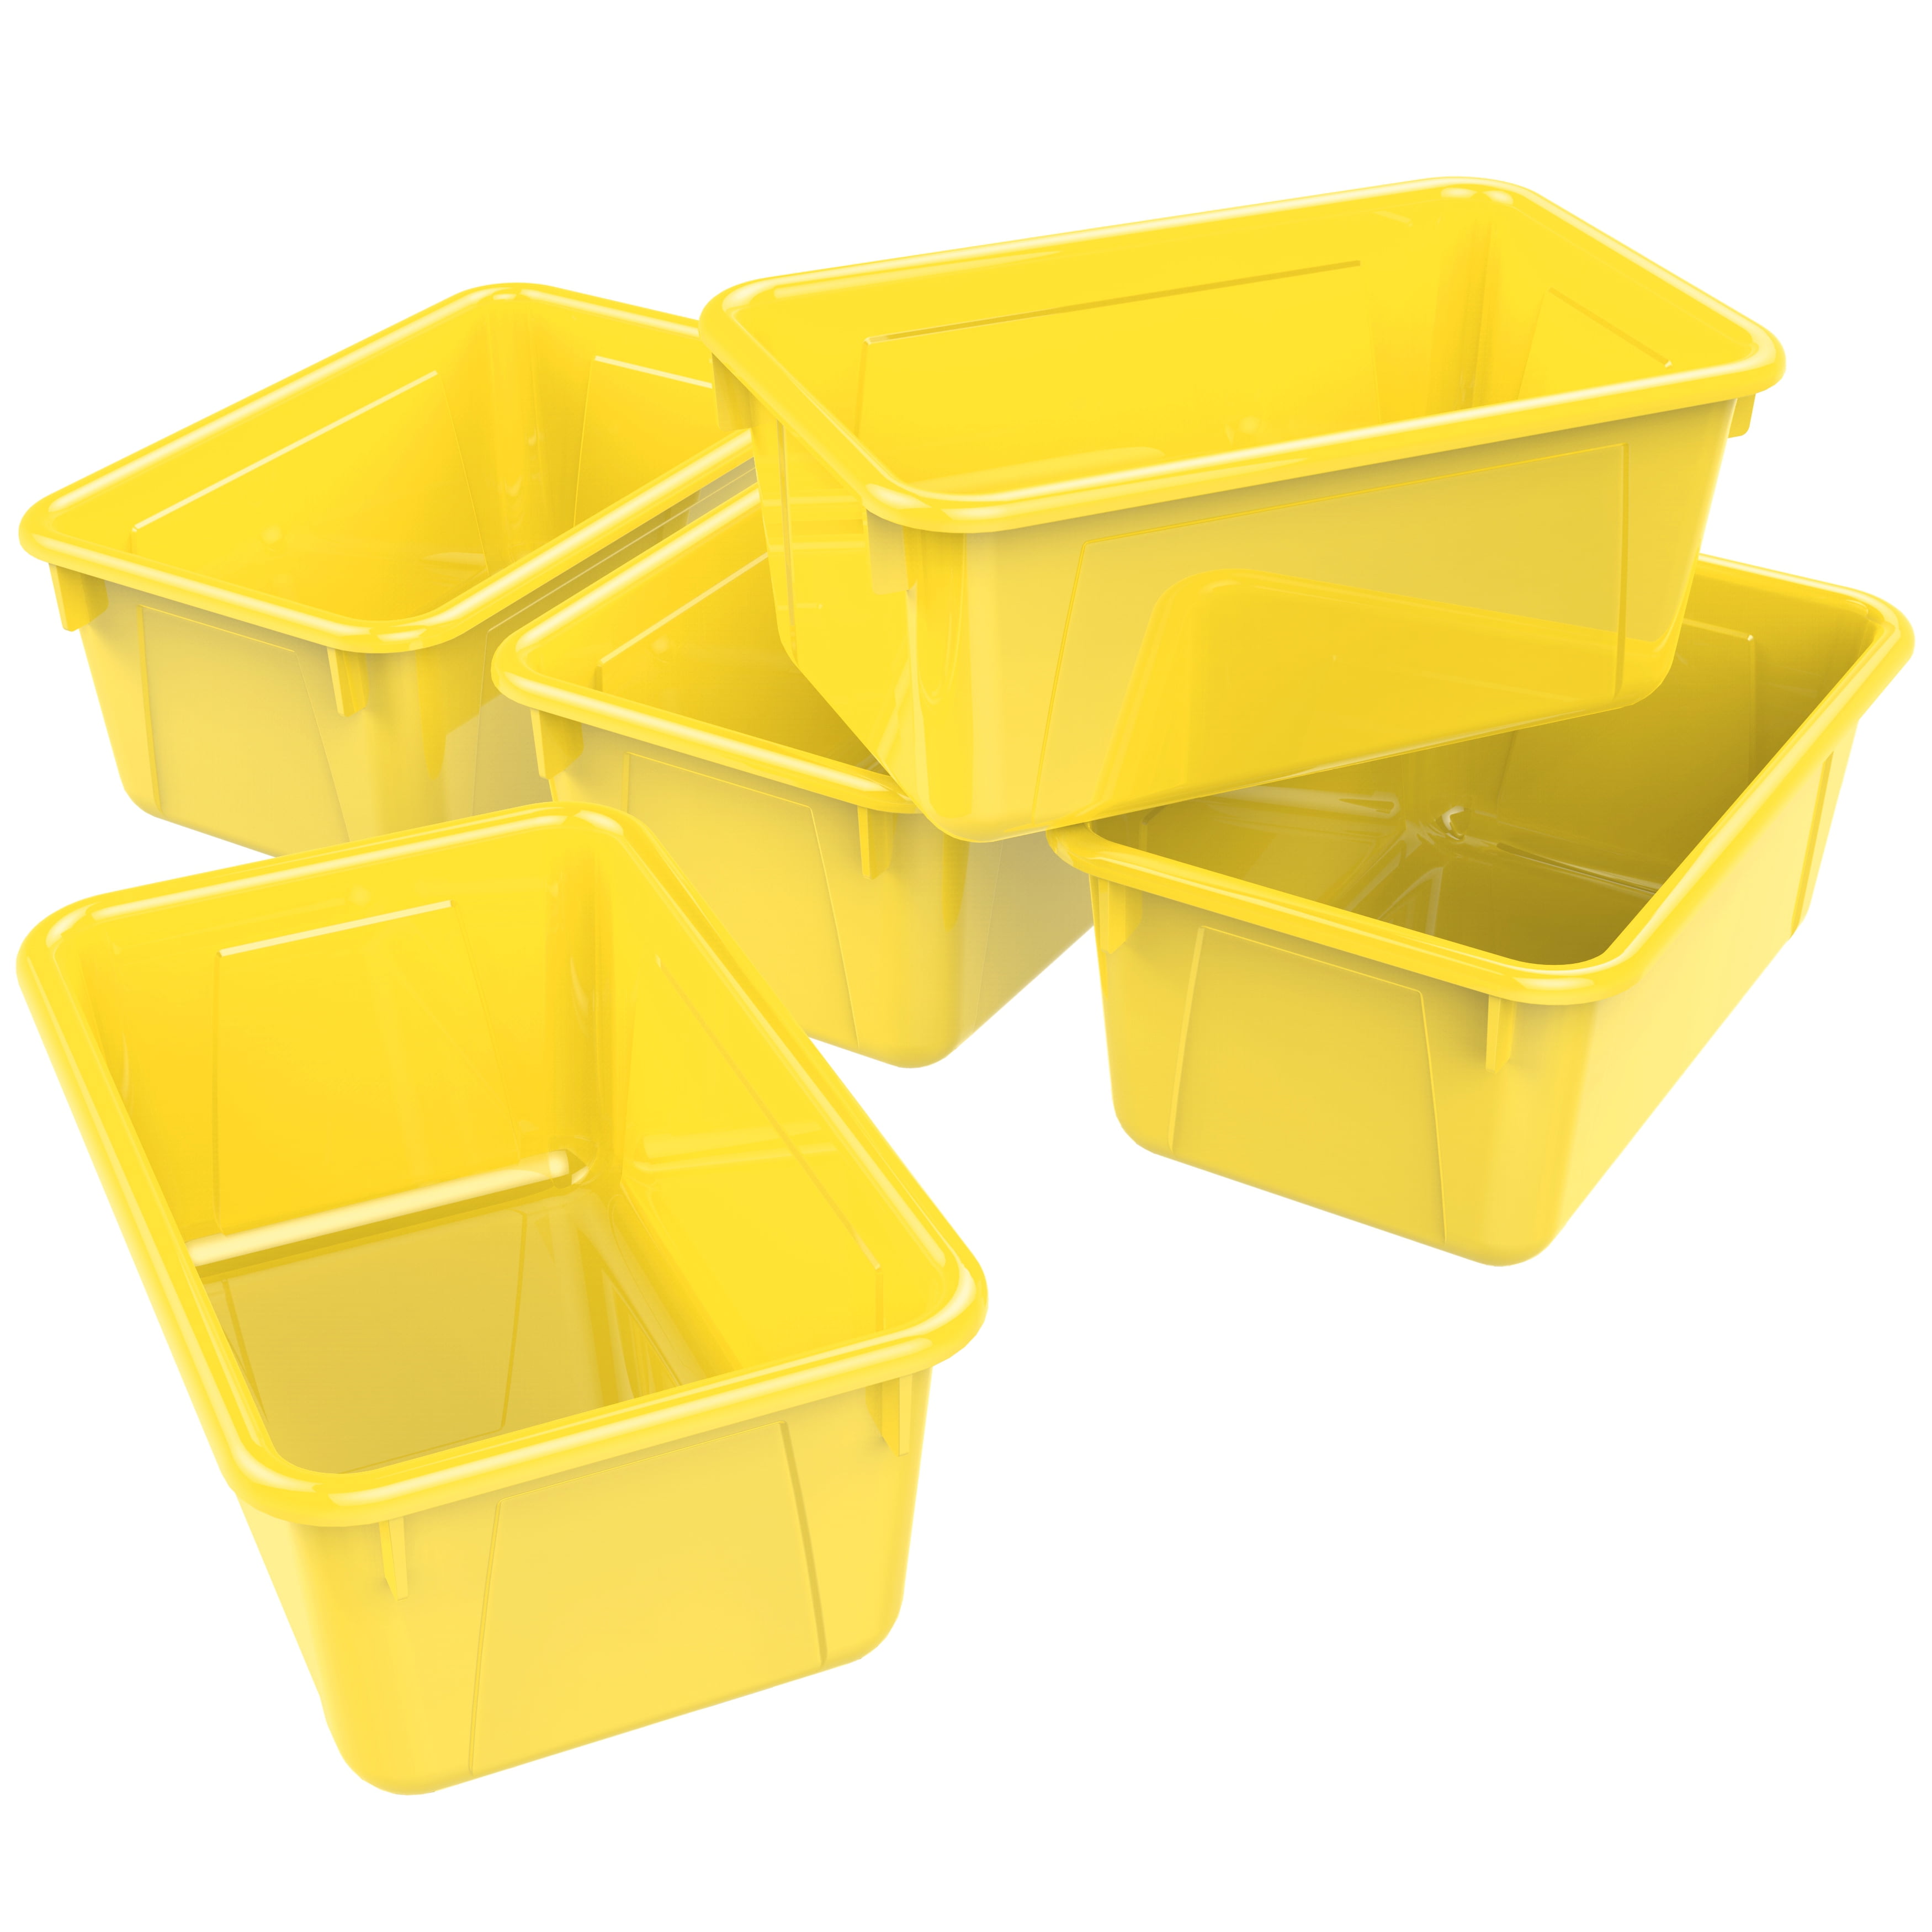 GAMENOTE Small Storage Bins with Lids - 5 Qt 6 Pack Stackable Plastic Cubby  C